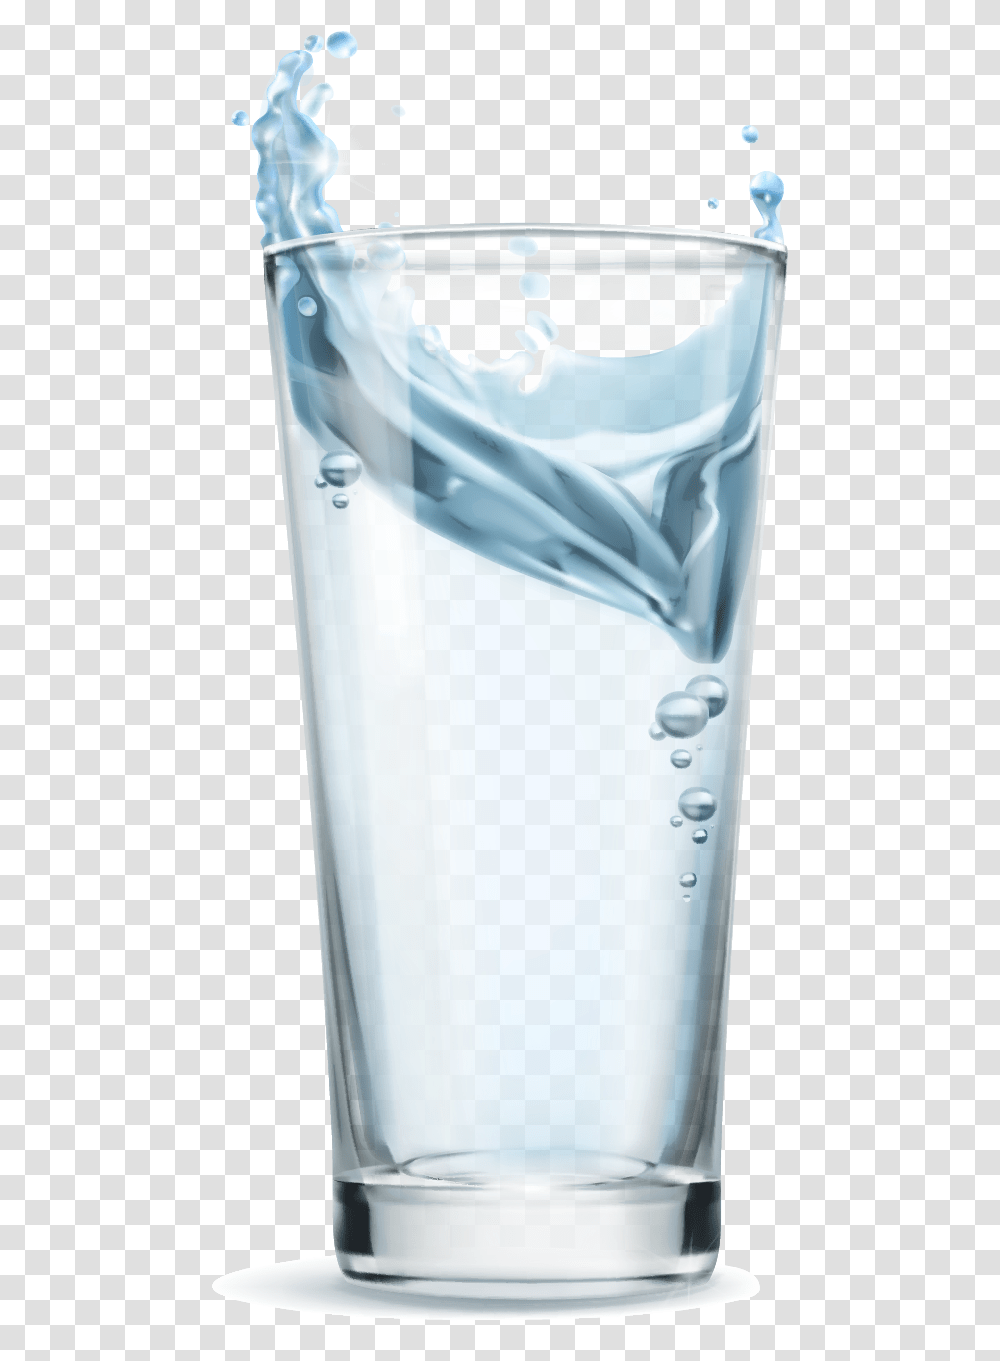 A Glass Of Water Vector Material Download Glass Of Water Vector, Bottle, Beverage, Drink, Shaker Transparent Png